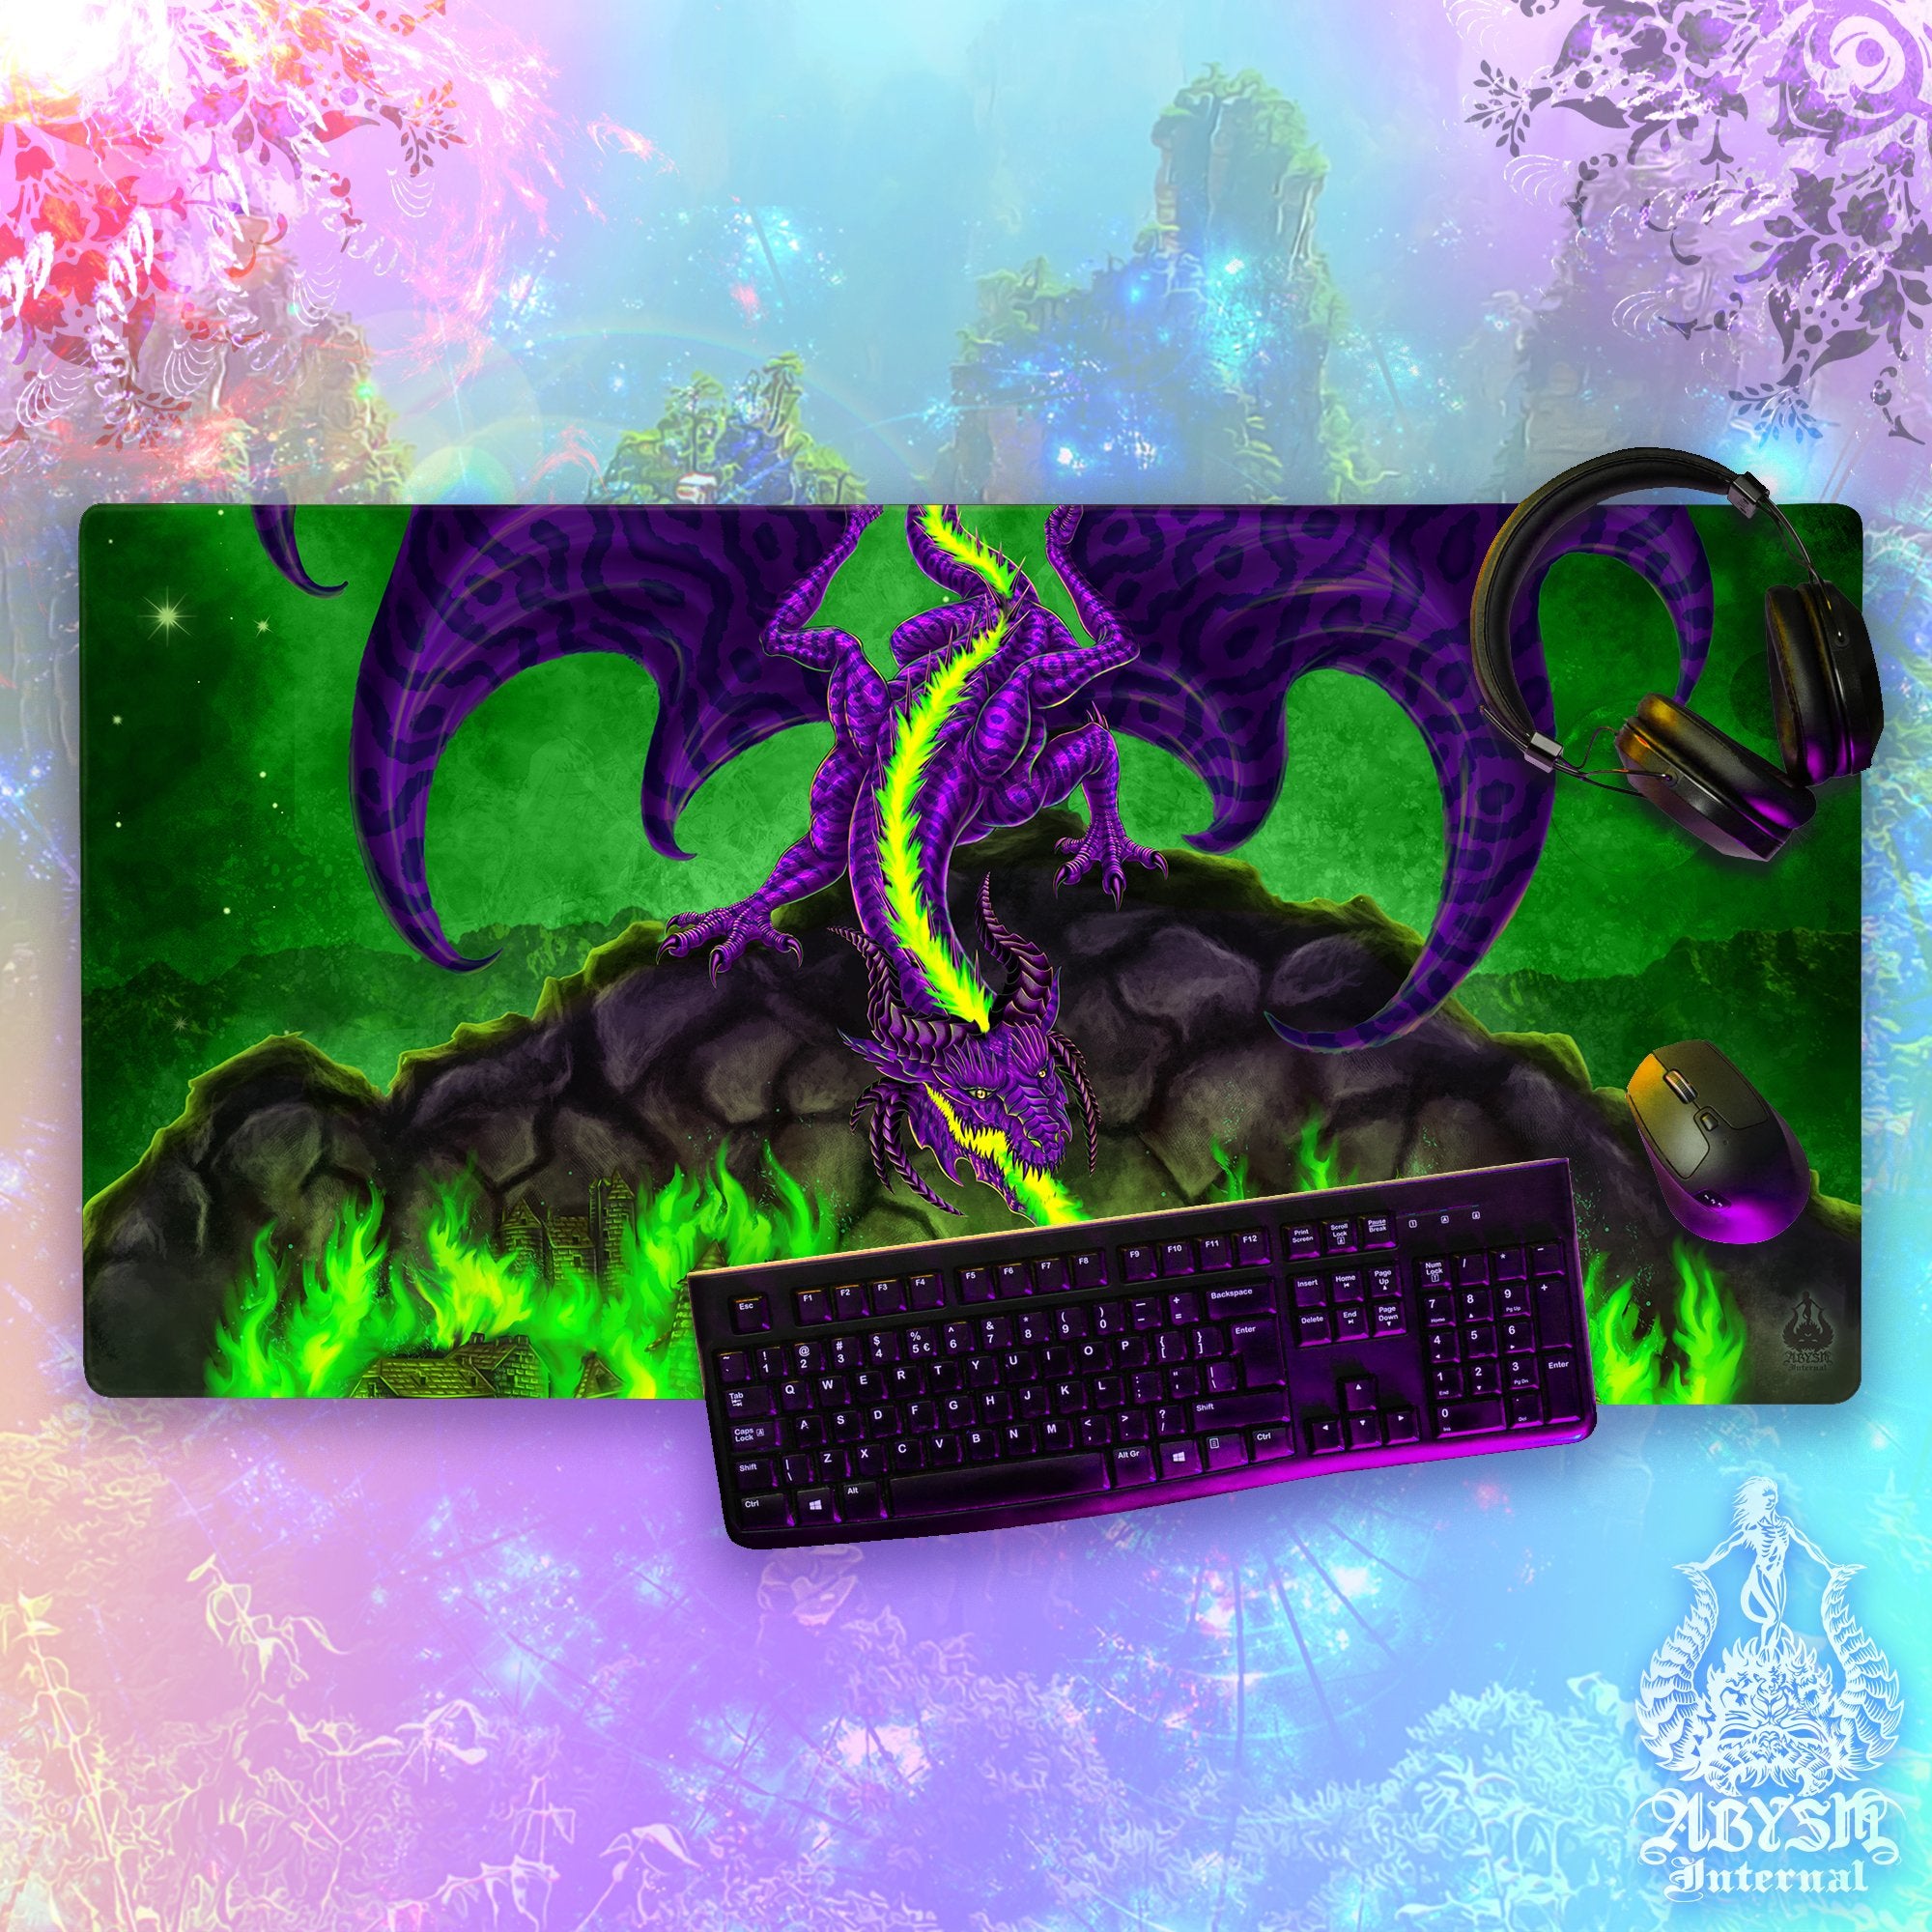 Dragon Gaming Desk Mat, Fantasy Art Mouse Pad, Purple and Green Table Protector Cover, RPG Workpad, DM Gift Print - Fire - Abysm Internal